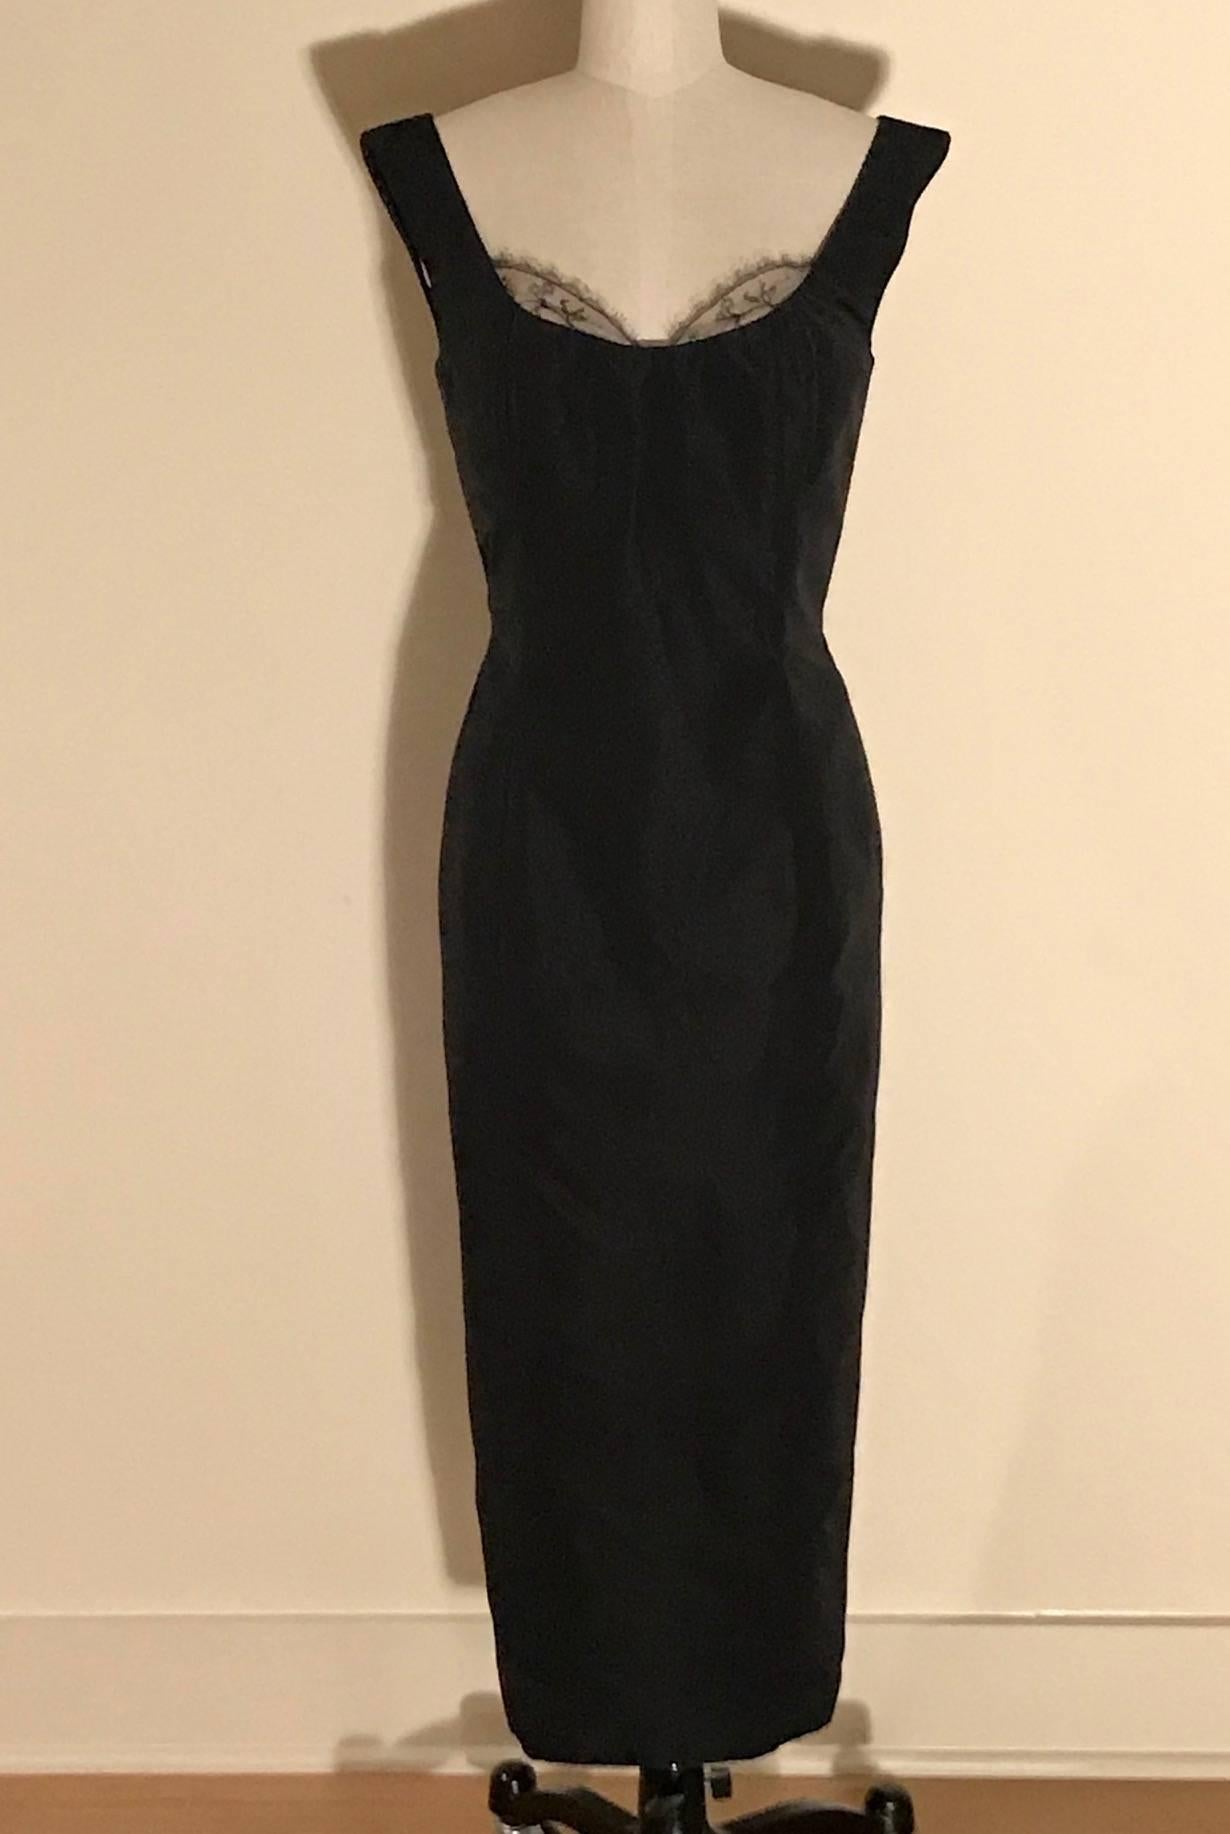 Alexander McQueen black silk dress from the 2005 Hitchcock inspired collection 'The Man Who Knew Too Much,' which channeled Tippi Hedren and Marilyn Monroe. Fitted midi length silhouette with lace accent at bust. Boned at upper bodice. Back zip and